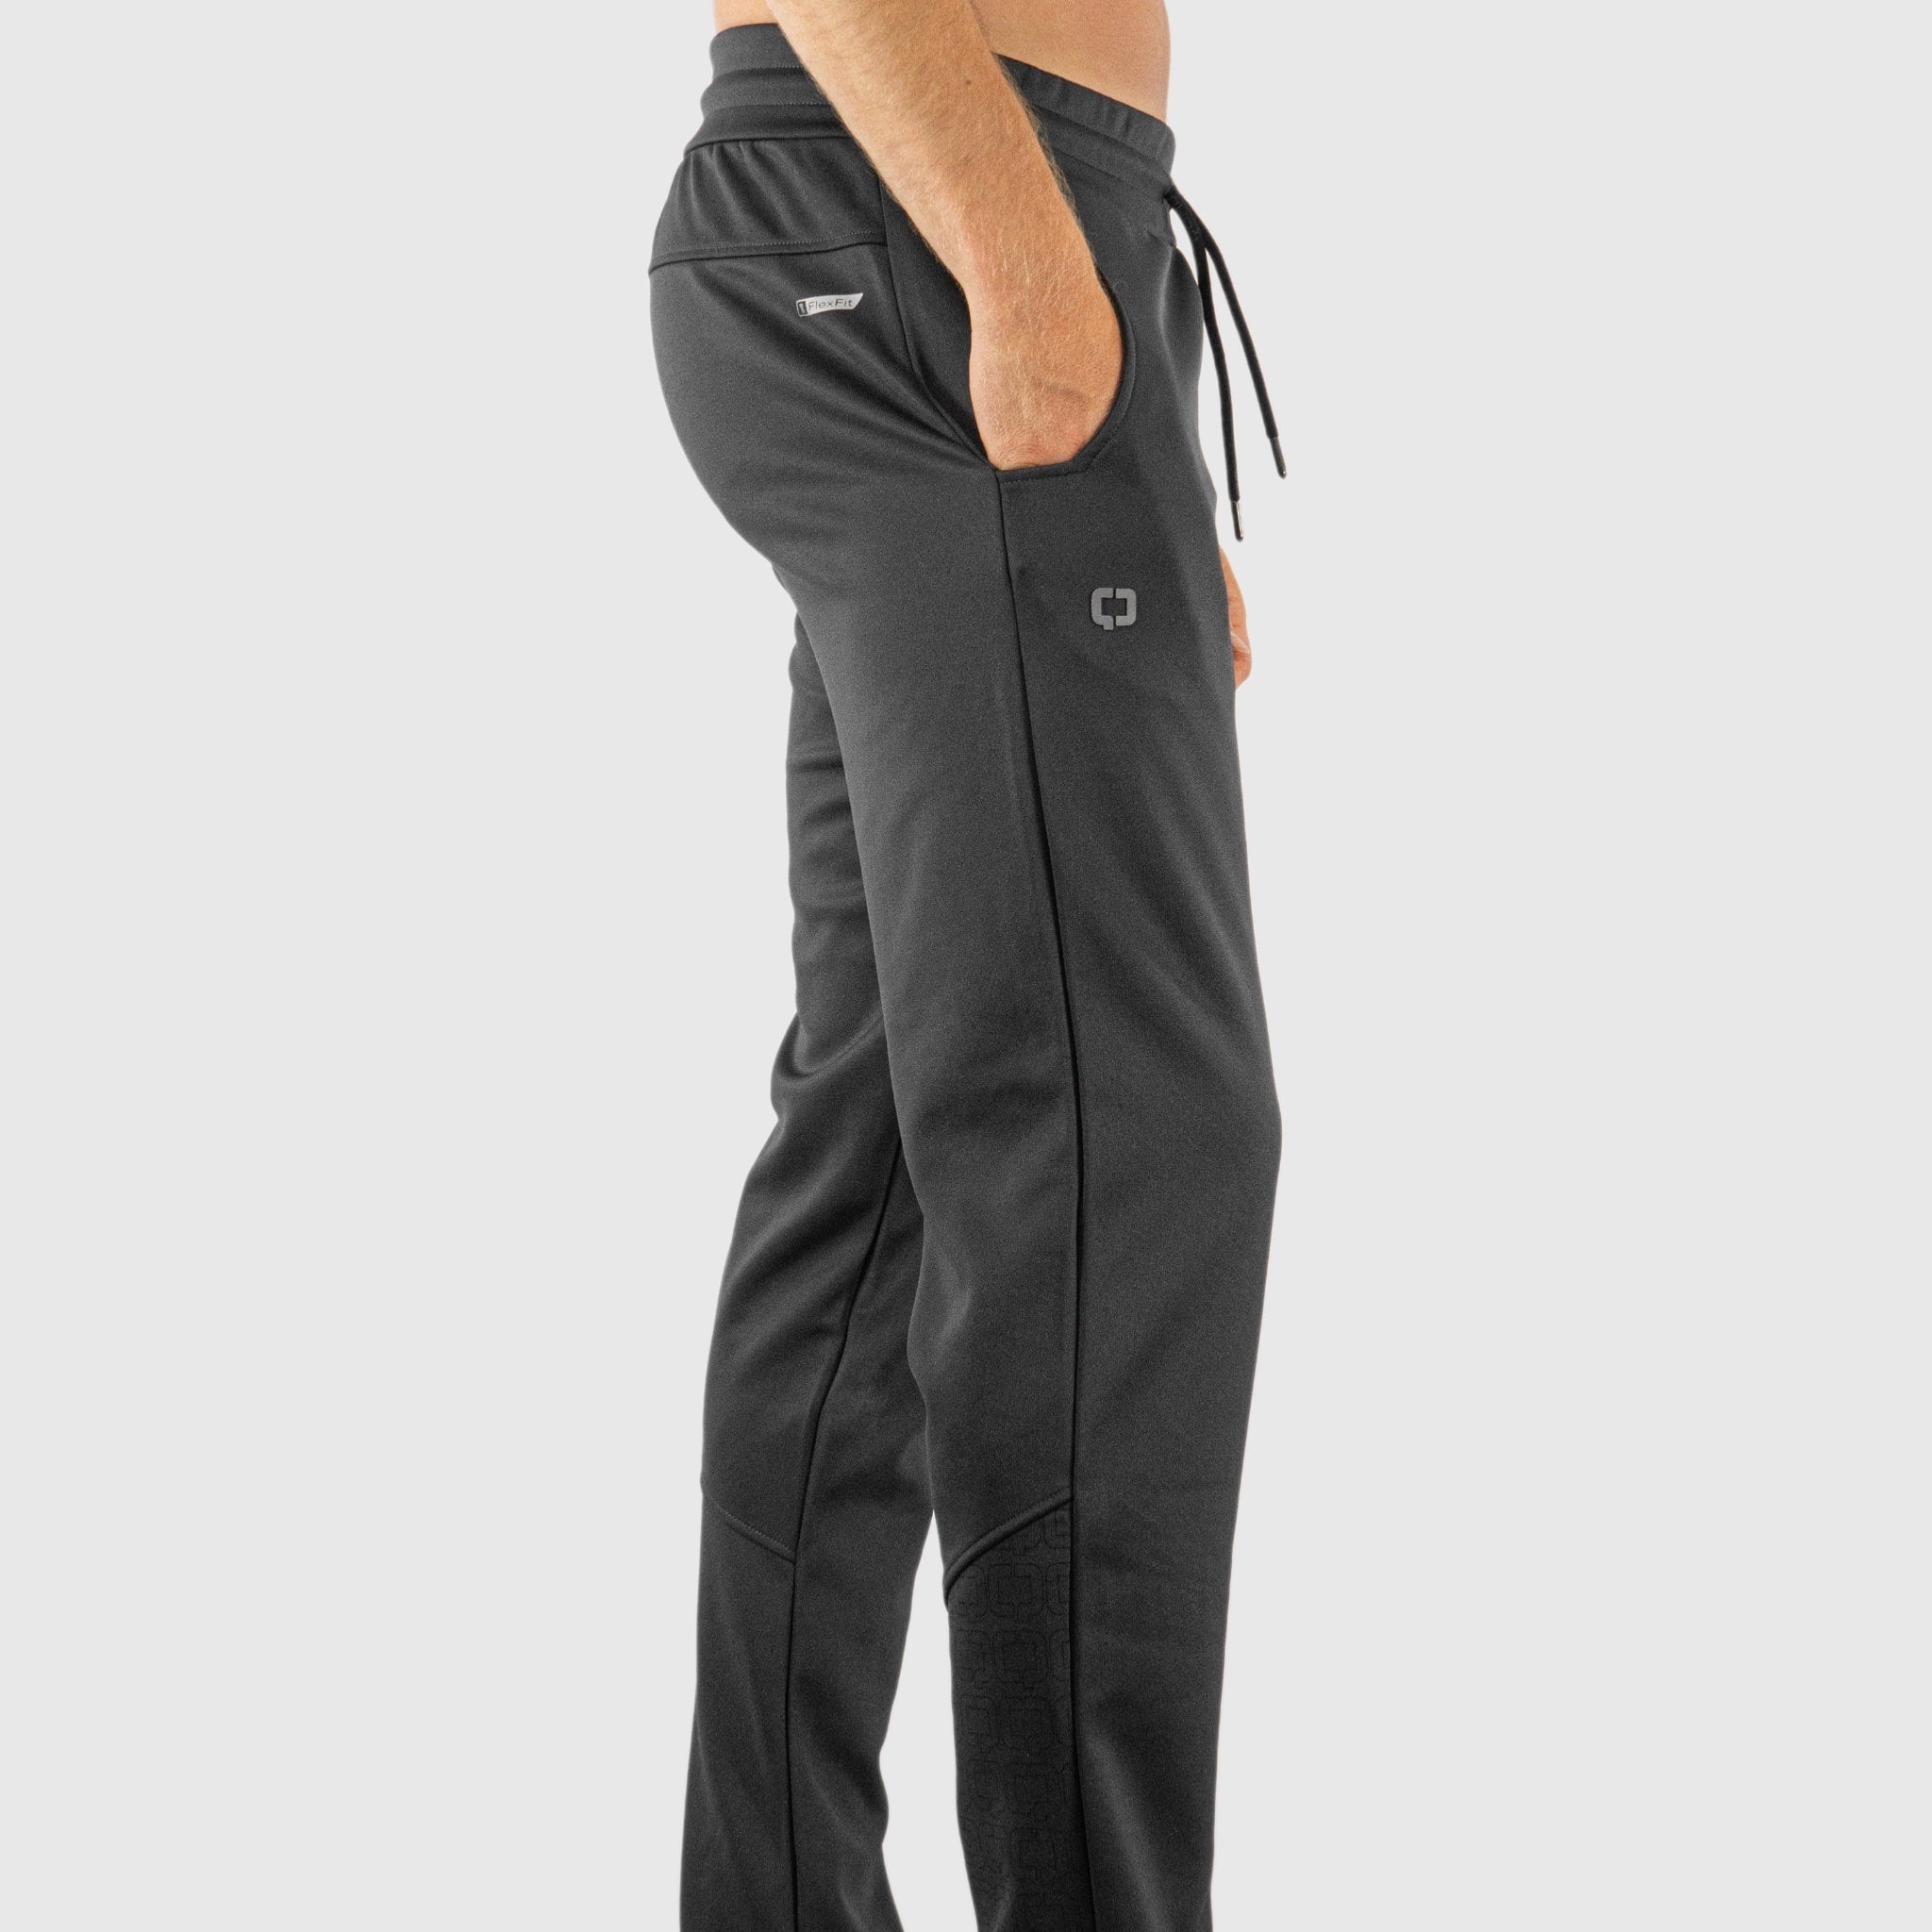 Quad Padel First-Class Tracksuit pants right view